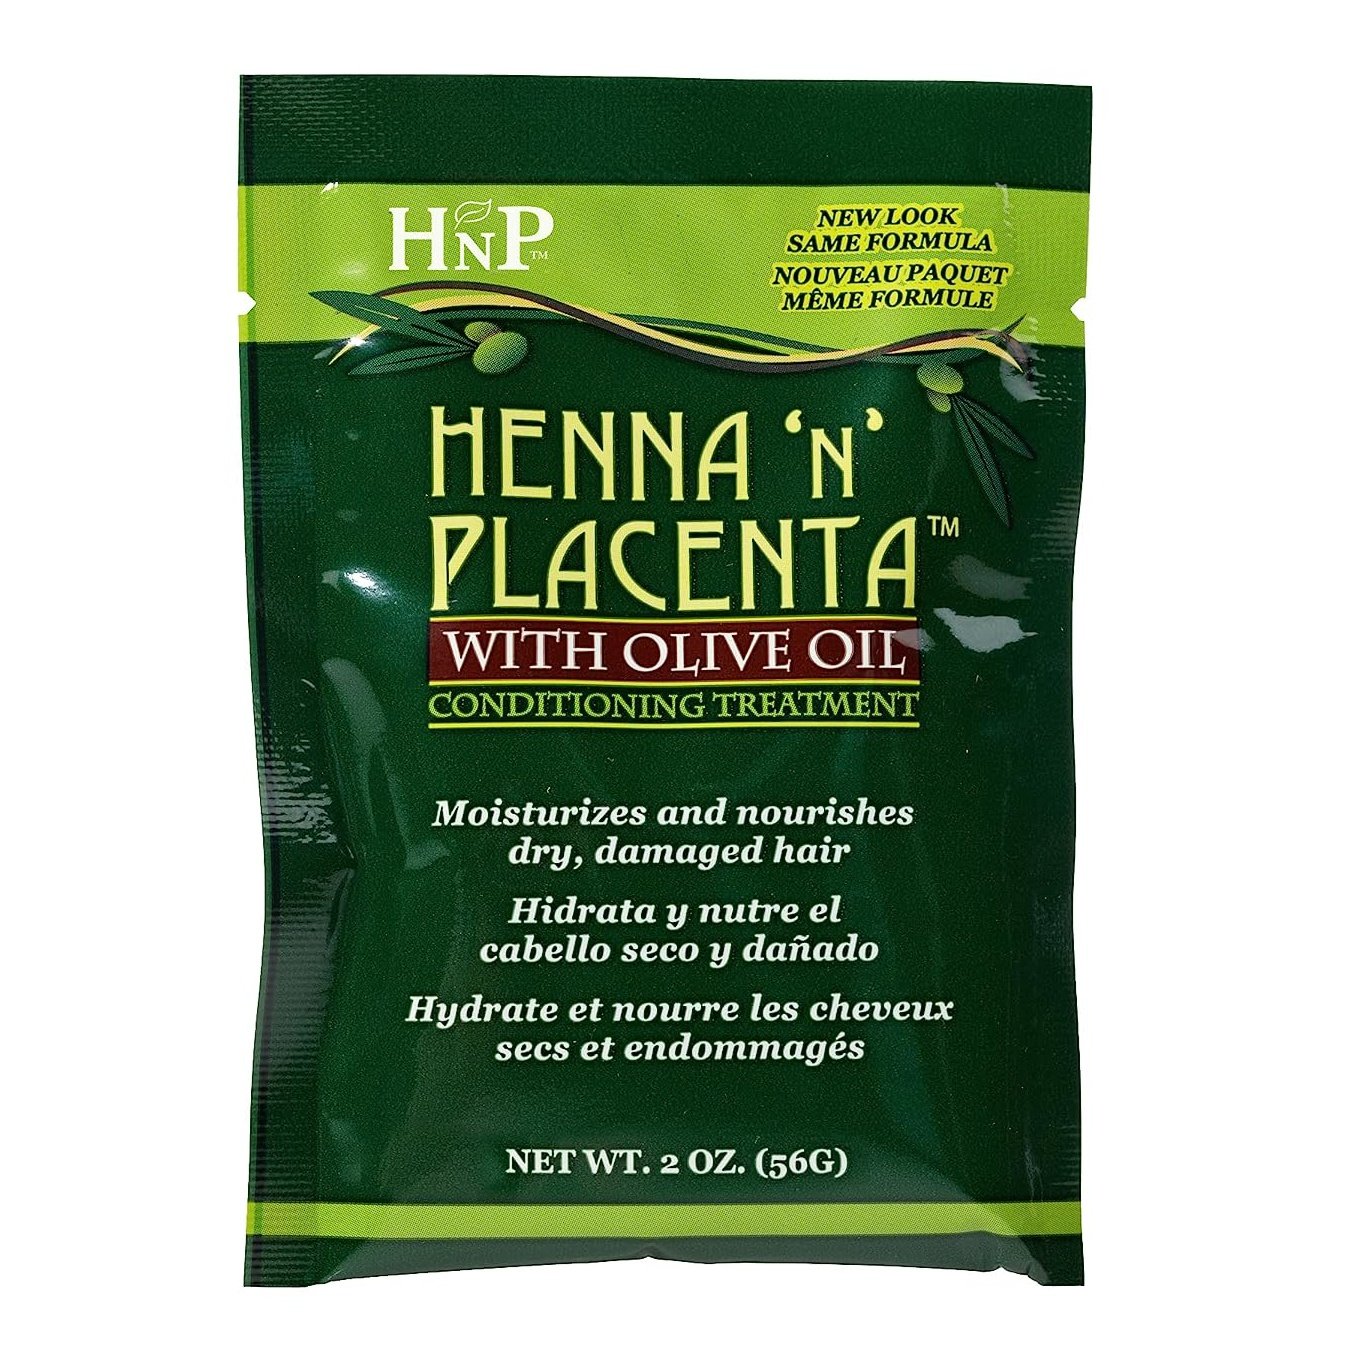 Hask Henna 'N' Placenta with Olive Oil Conditioning Treatment Packet 2oz